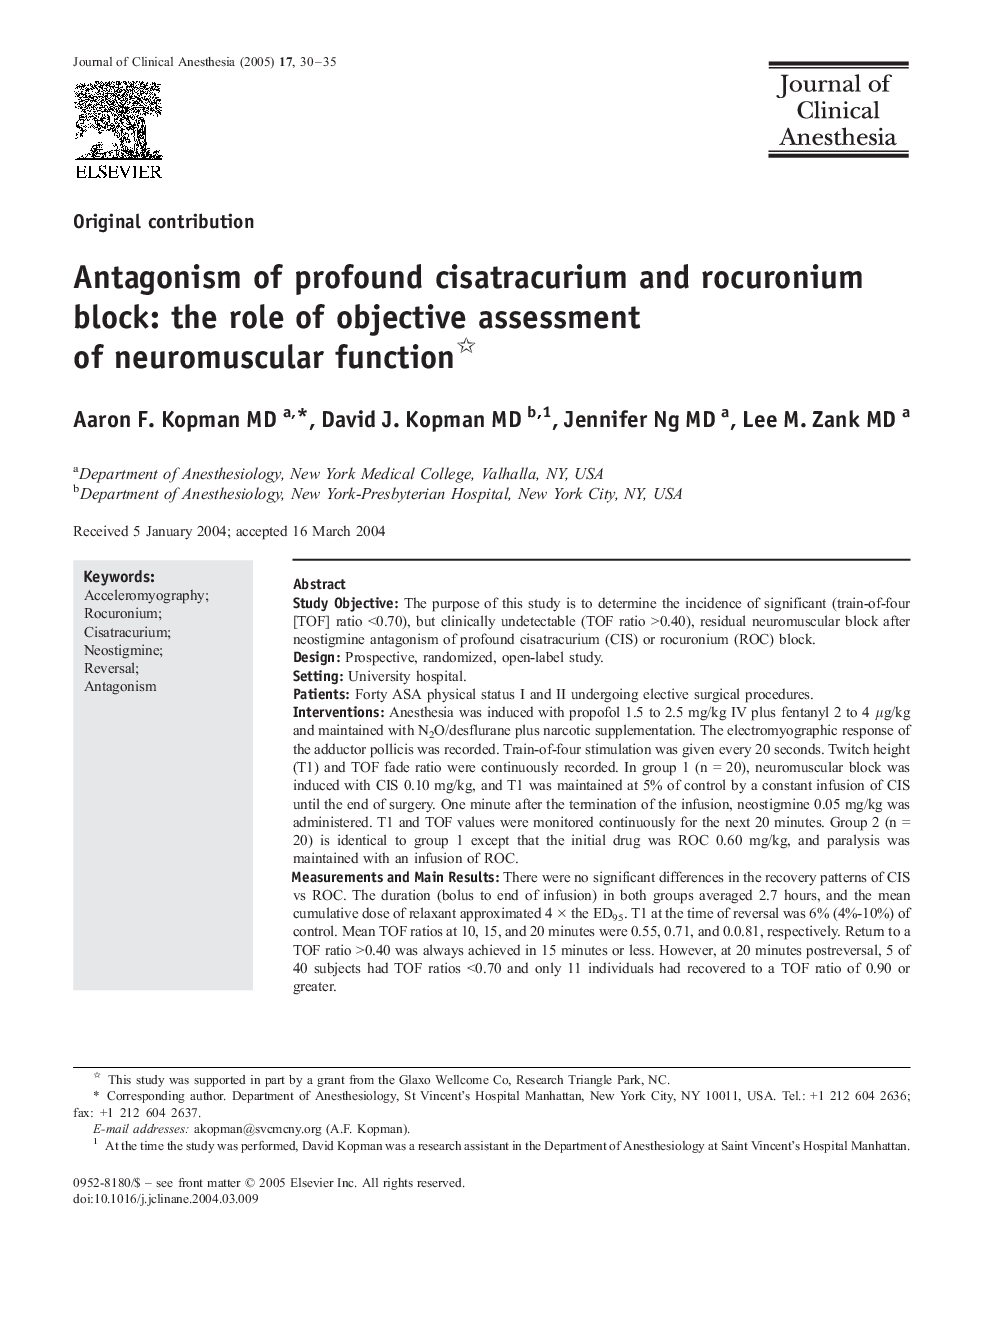 Antagonism of profound cisatracurium and rocuronium block: the role of objective assessment of neuromuscular function